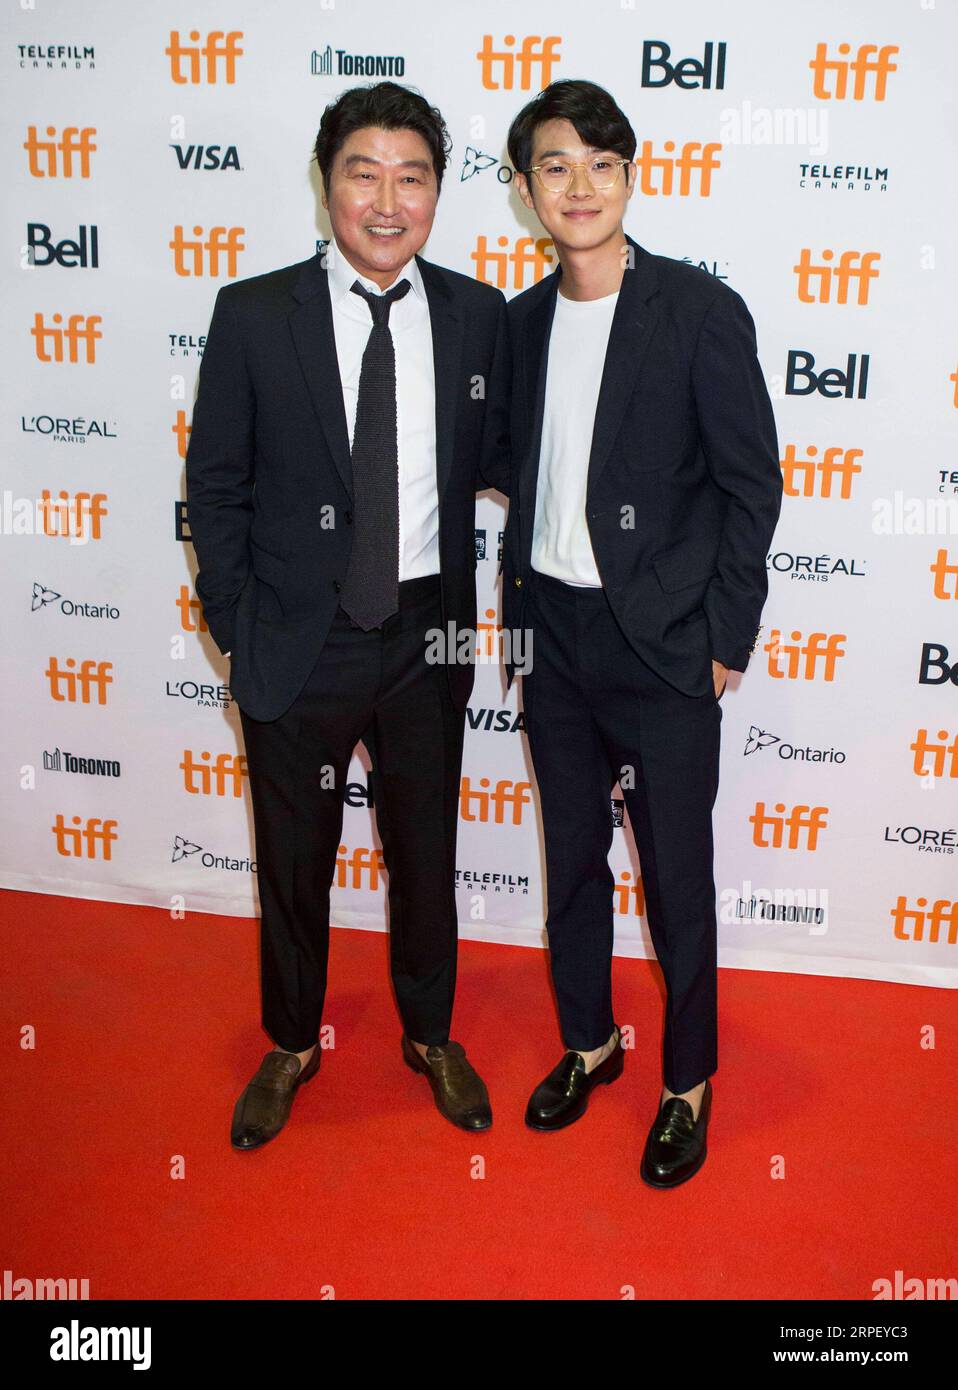 190907 -- TORONTO, Sept. 7, 2019 -- Actors Choi Woo-shik R and Song Kang-ho pose for photos before the Canadian premiere of the film Parasite at Ryerson Theatre during the 2019 Toronto International Film FestivalTIFF in Toronto, Canada, Sept. 6, 2019. Photo by /Xinhua CANADA-TORONTO-TIFF-FILM PARASITE ZouxZheng PUBLICATIONxNOTxINxCHN Stock Photo